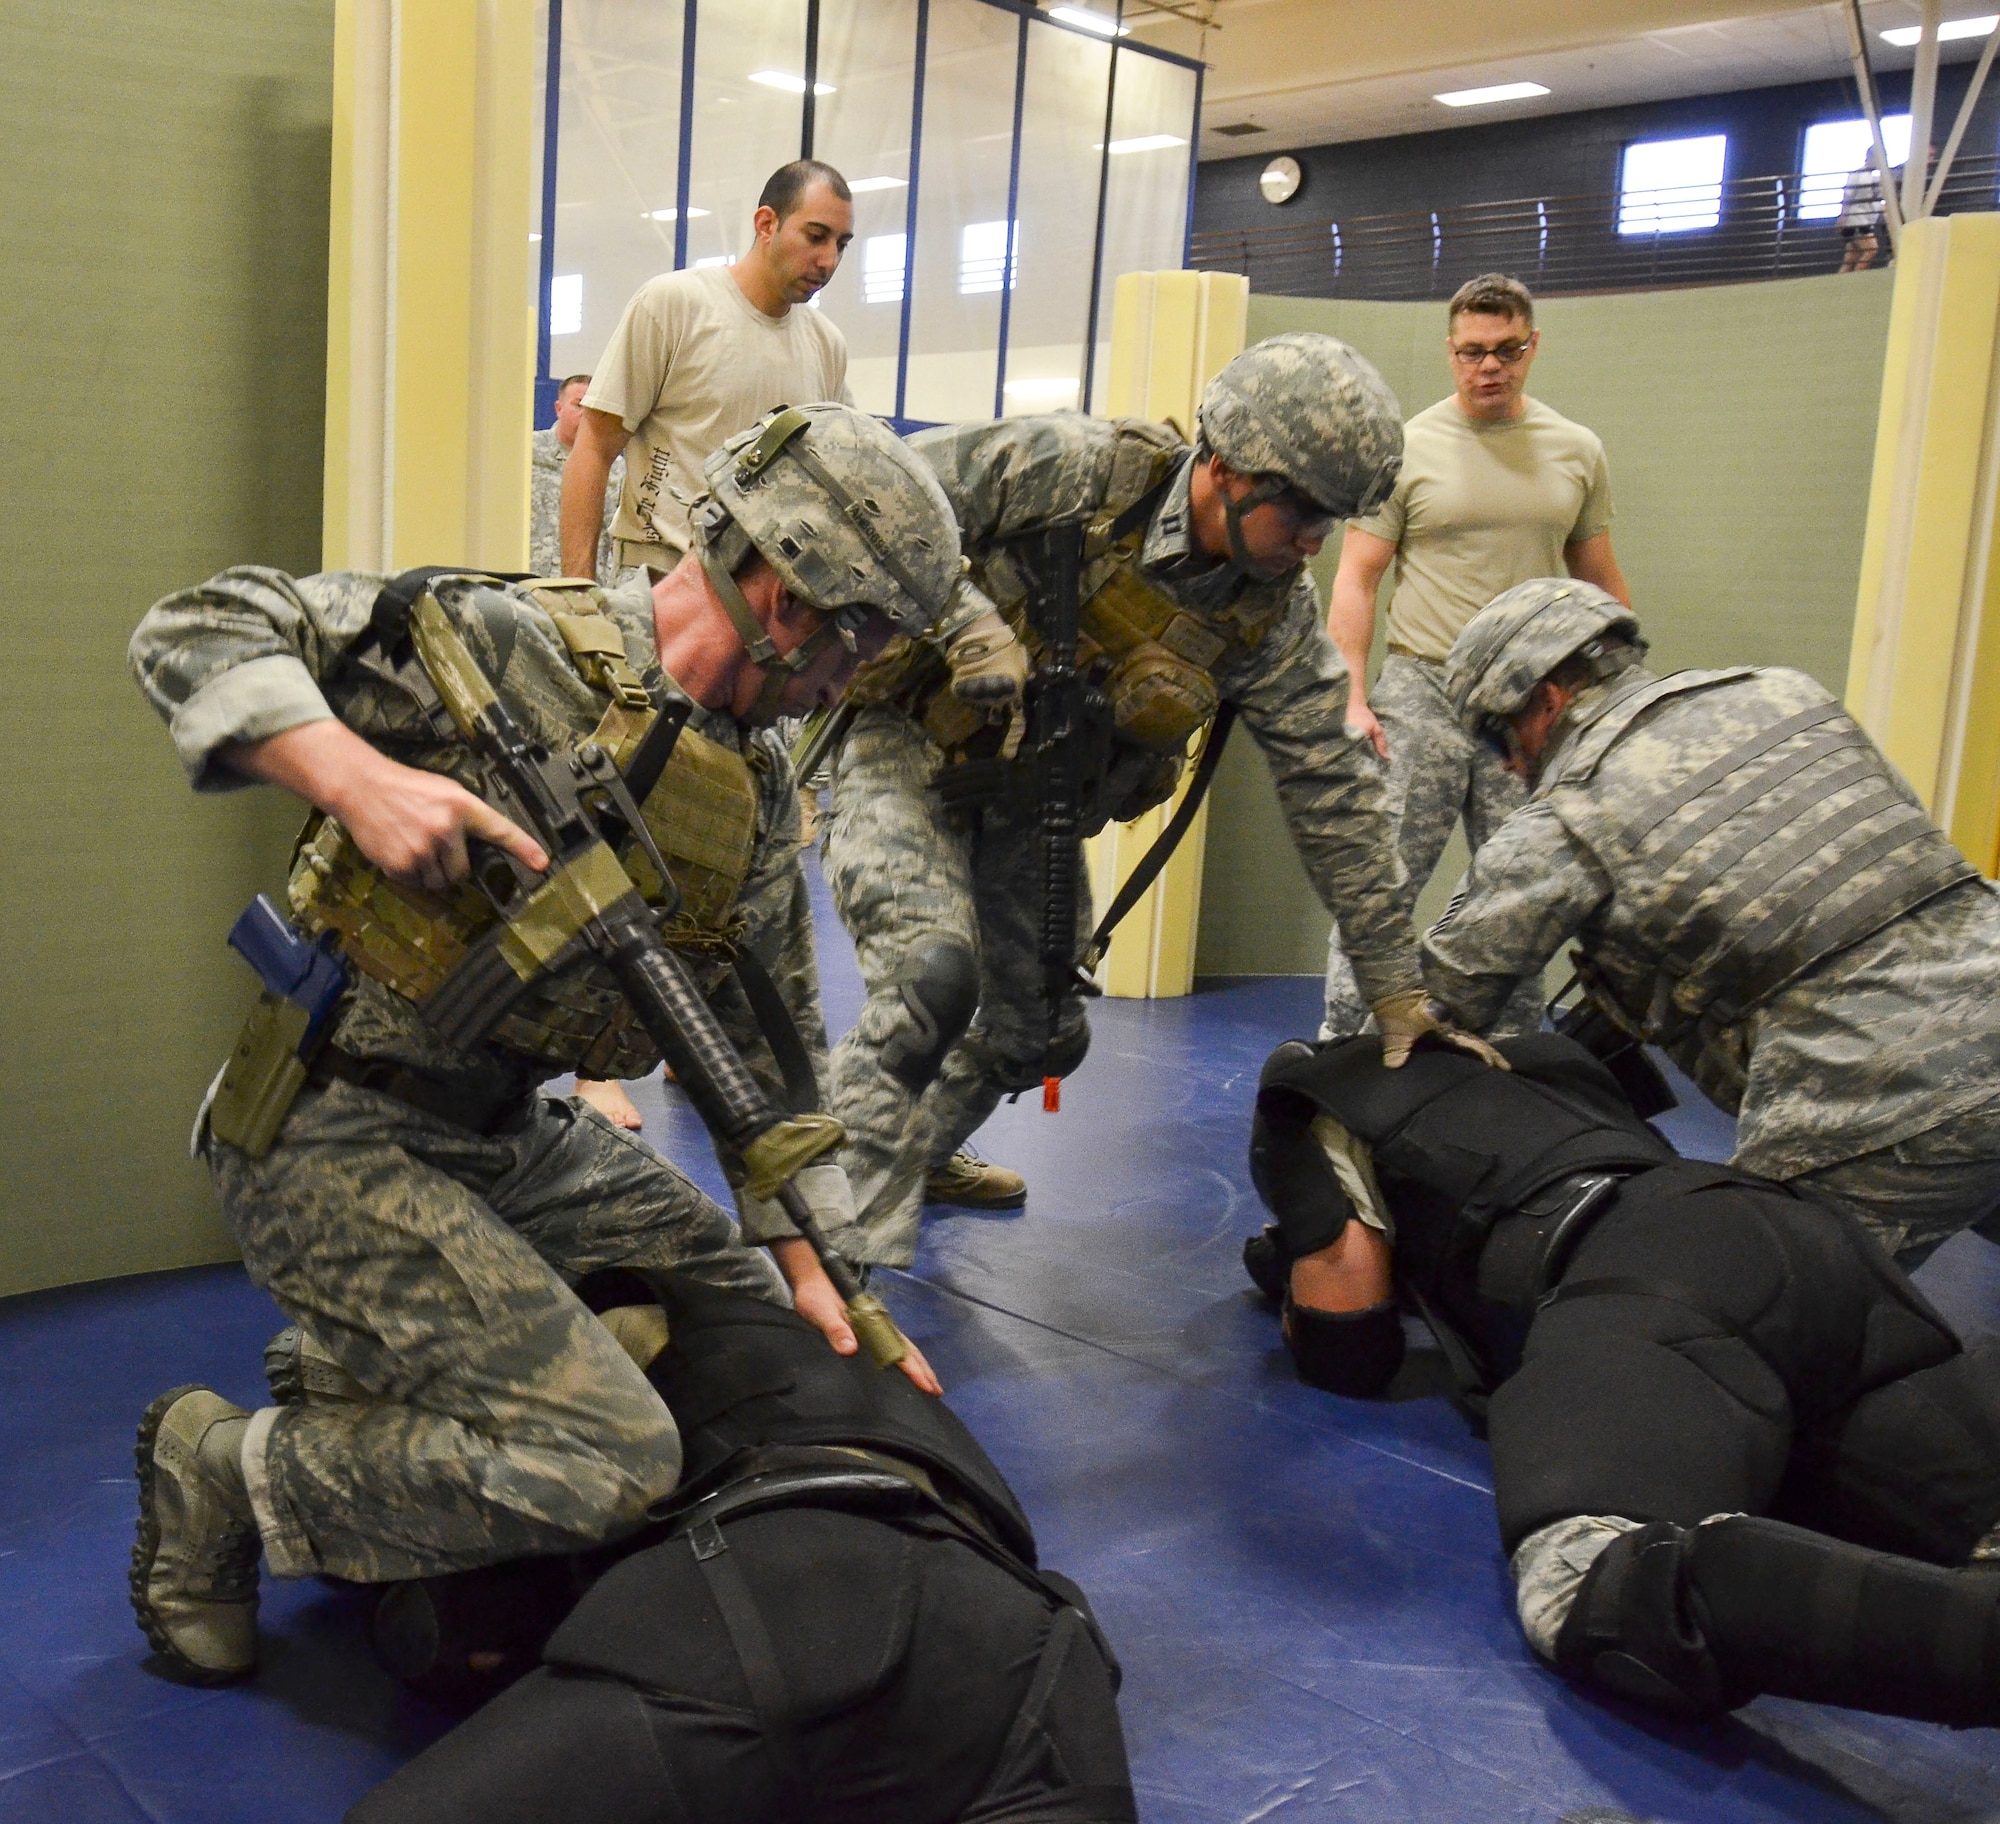 (Left) Maj. Darrell Walton, 45th Fighter Squadron, along with Capt. Brian Dicks, 55th Rescue Squadron, and Senior Master Sgt. Kevin Wendt, 612th Support Squadron, take down two aggressive combatants during the Modern Army Combatives Program (MACP) Basic Combatives Course Level at Davis-Monthan Air Force Base, Ariz., 1 Jan. 16, 2014. The 40-hour course focuses on the three phases of basic fighting strategy; close the distance, gain the dominate position, and how to finish the fight. (U.S. Air Force photo by Staff Sgt. Adam Grant/Released)